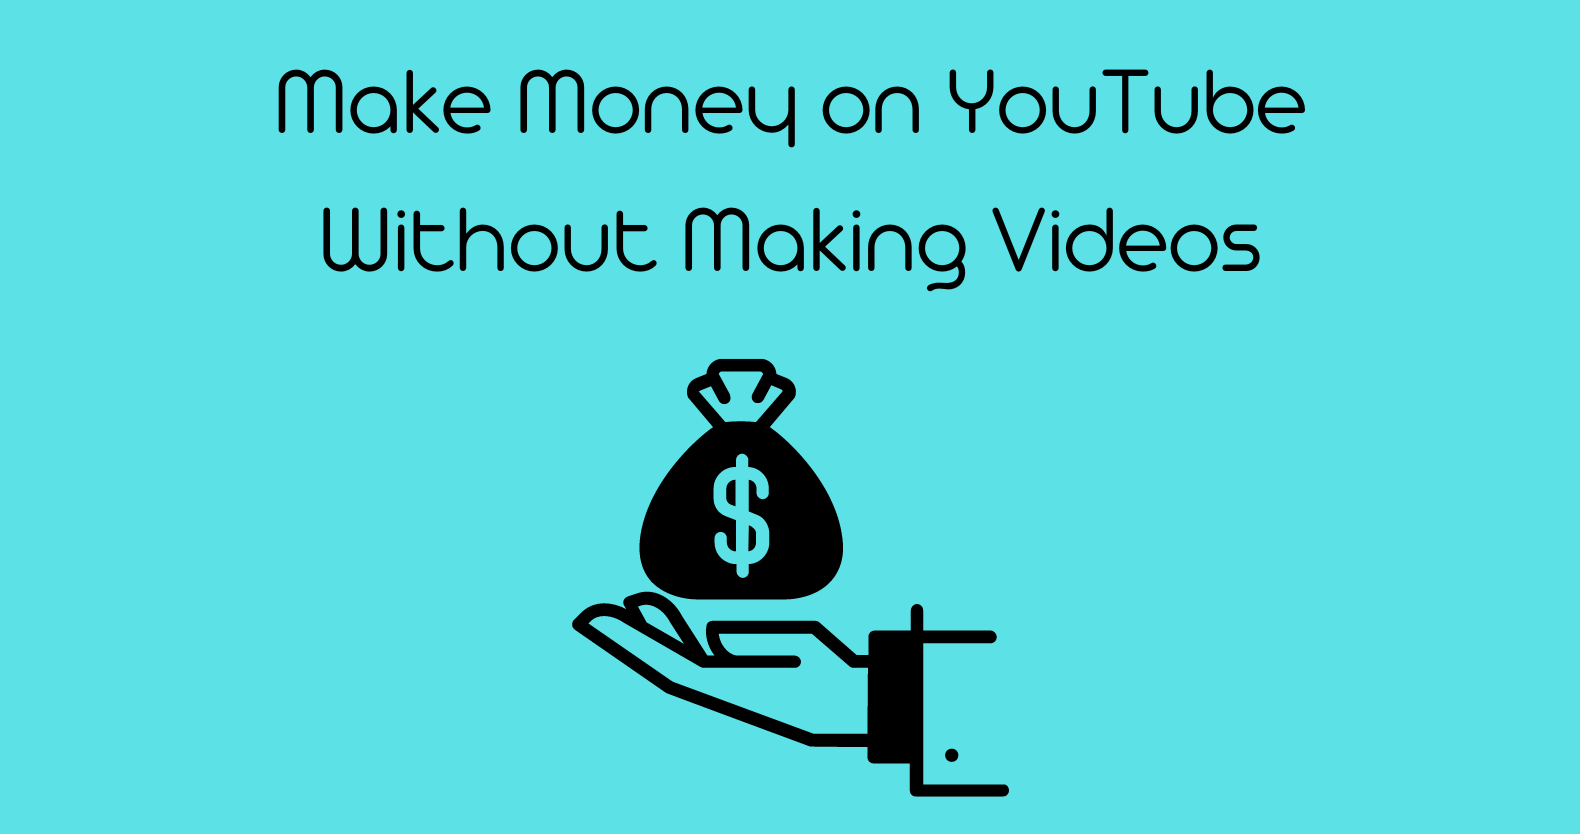 How do you make money on YouTube without making videos